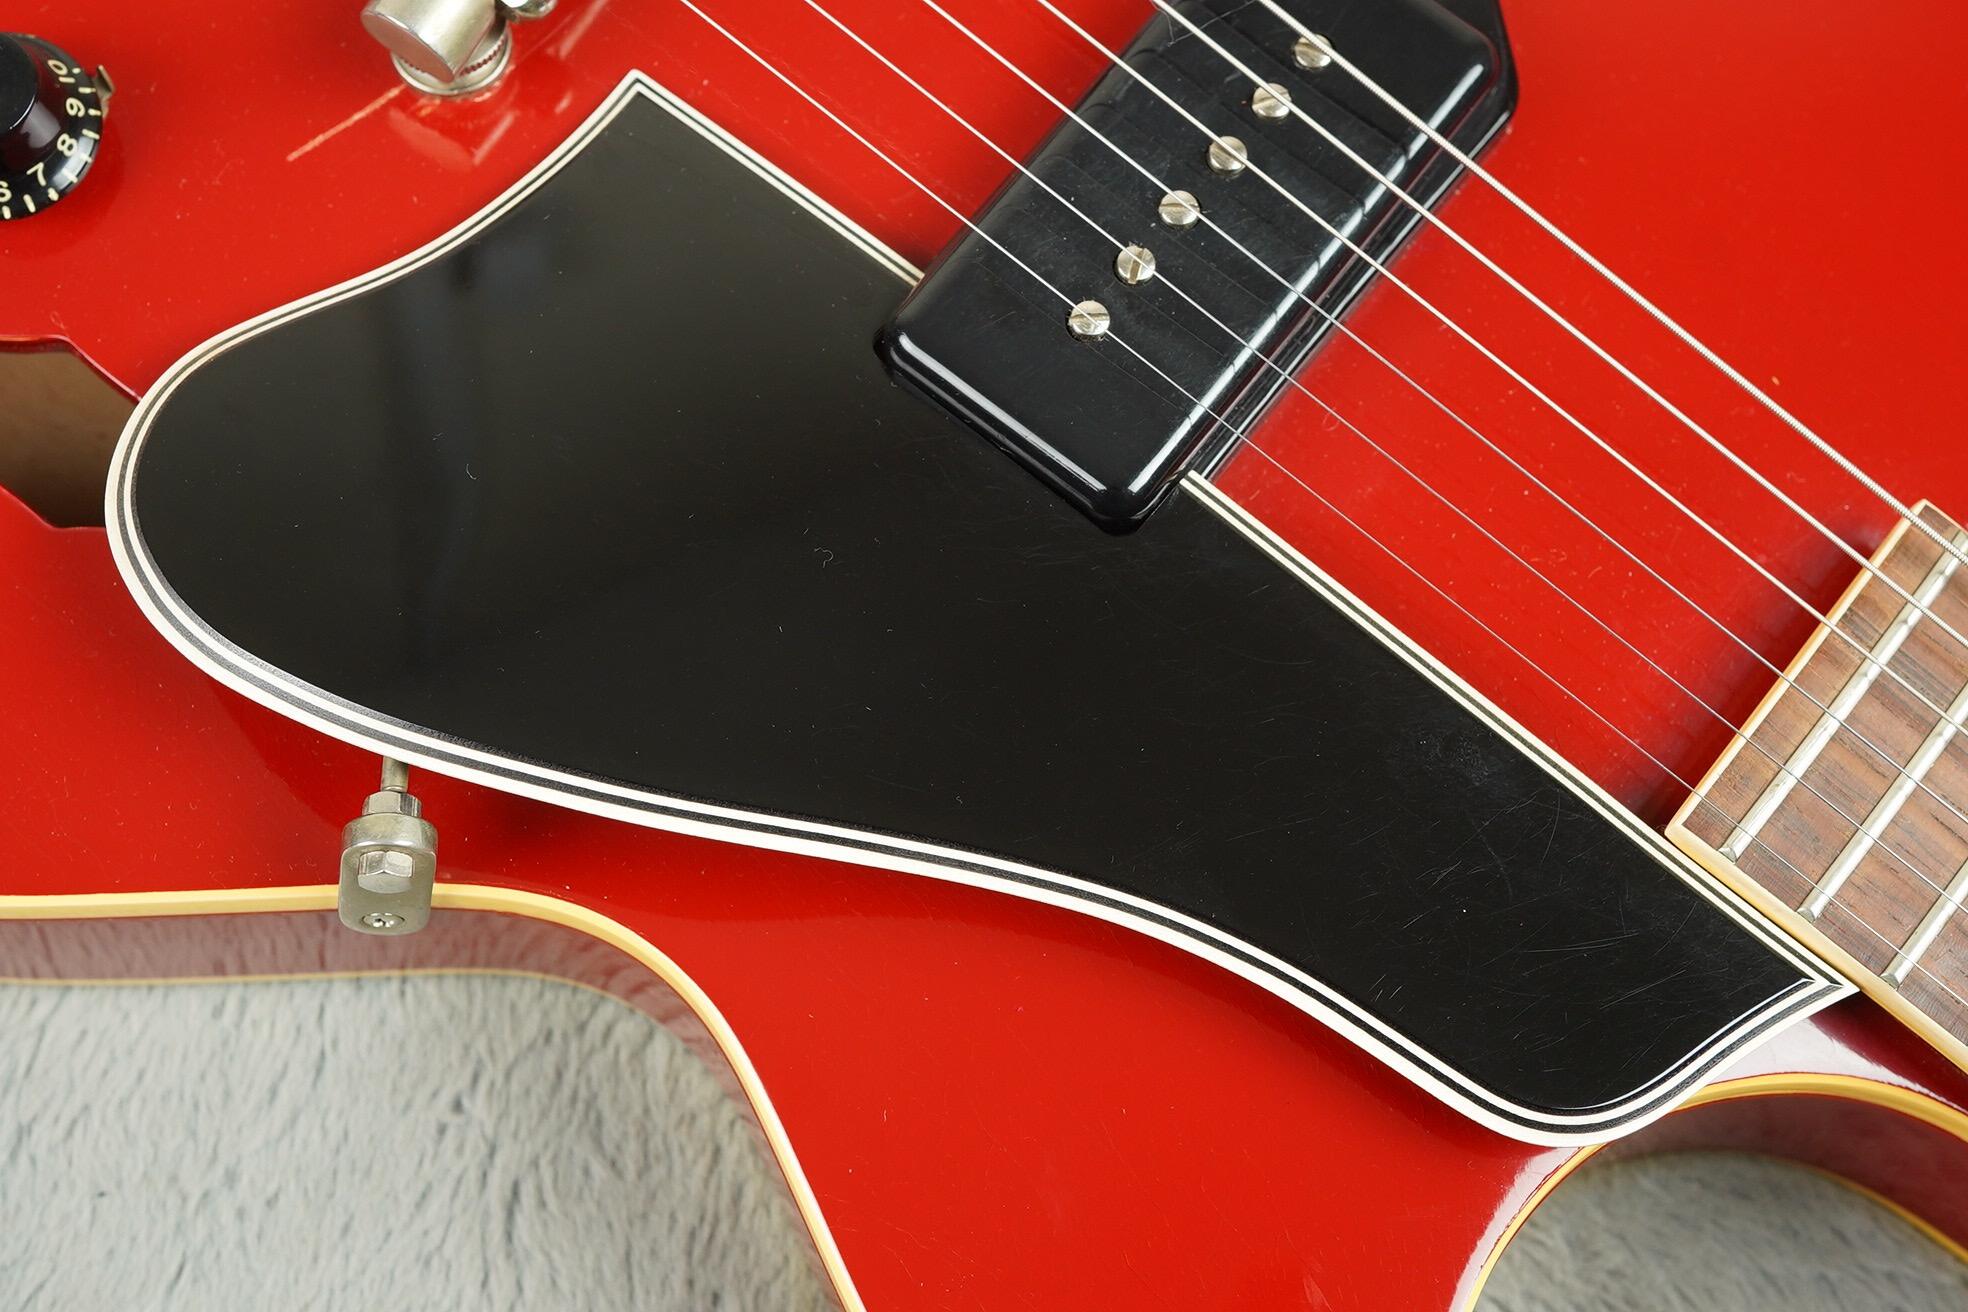 1959 Gibson ES-225 T Special Order Factory Red